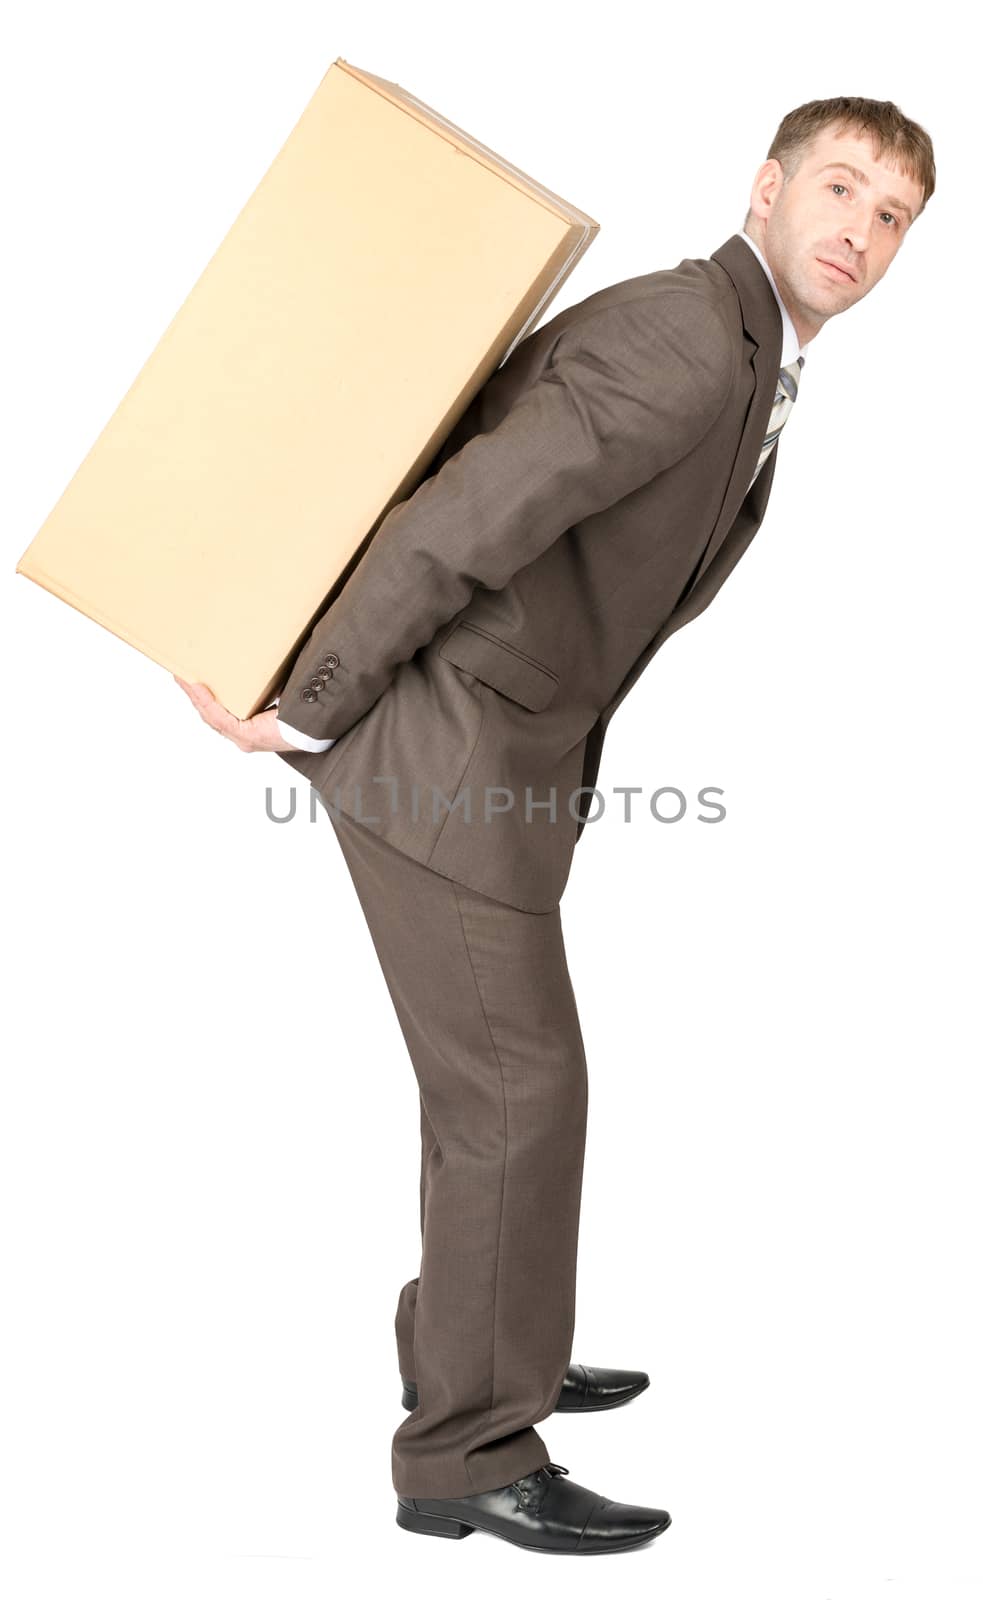 Tired young businessman carrying heavy box on back. Isolated on white background